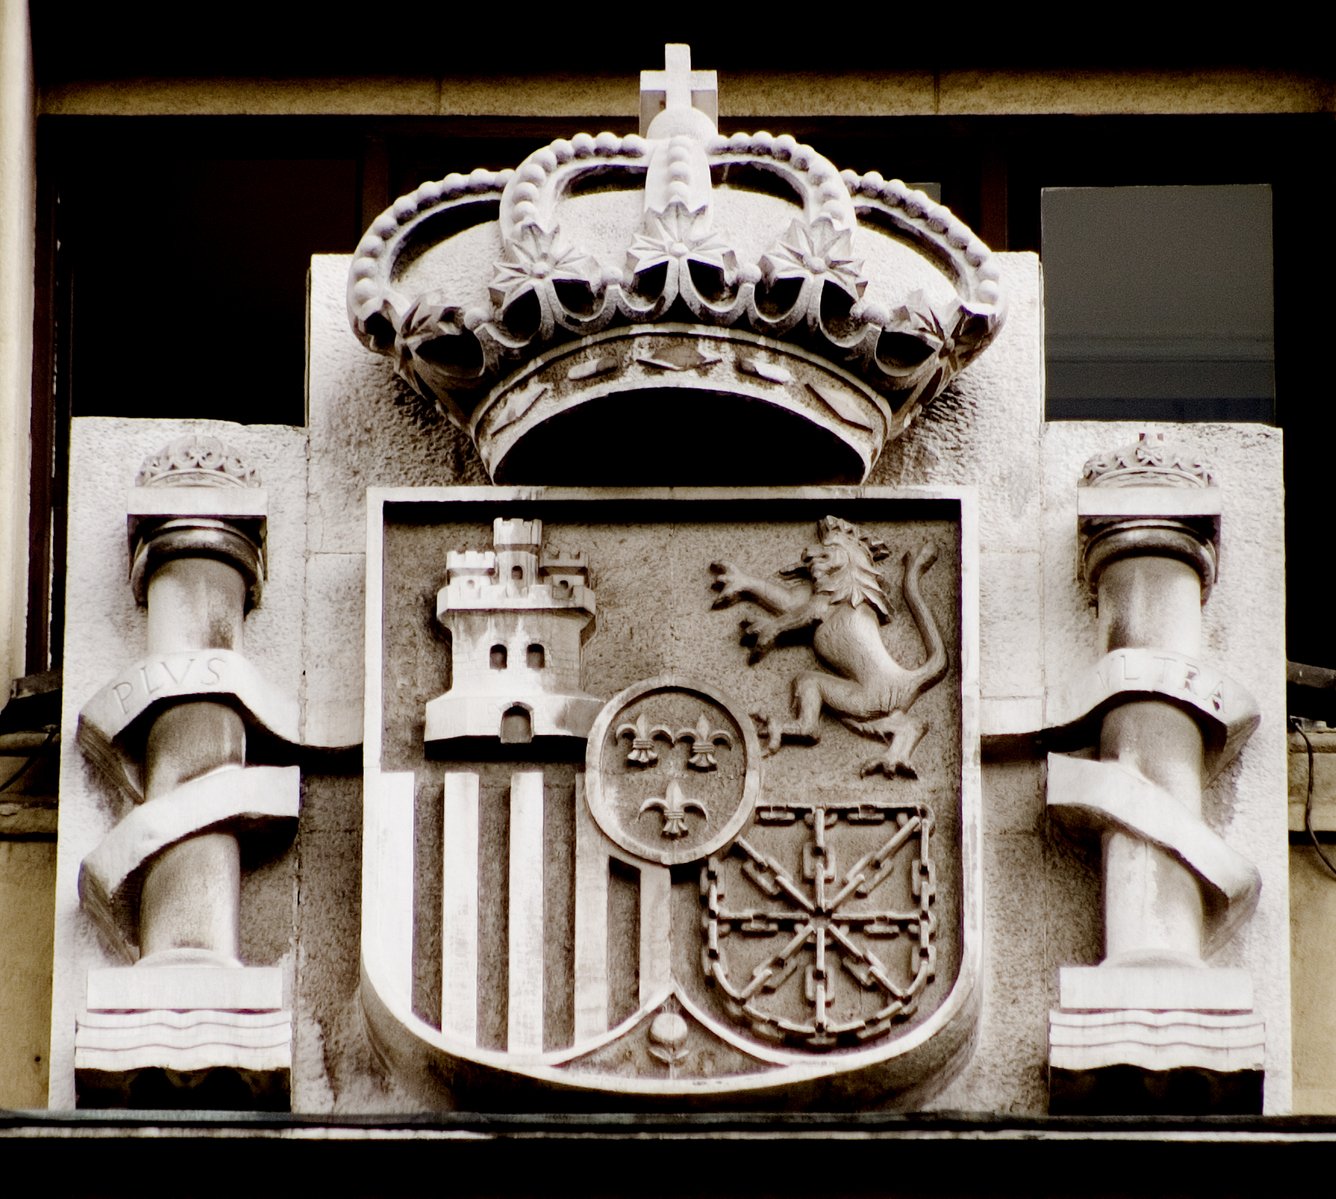 an coat of arms and two lions are embellished on the facade of a building